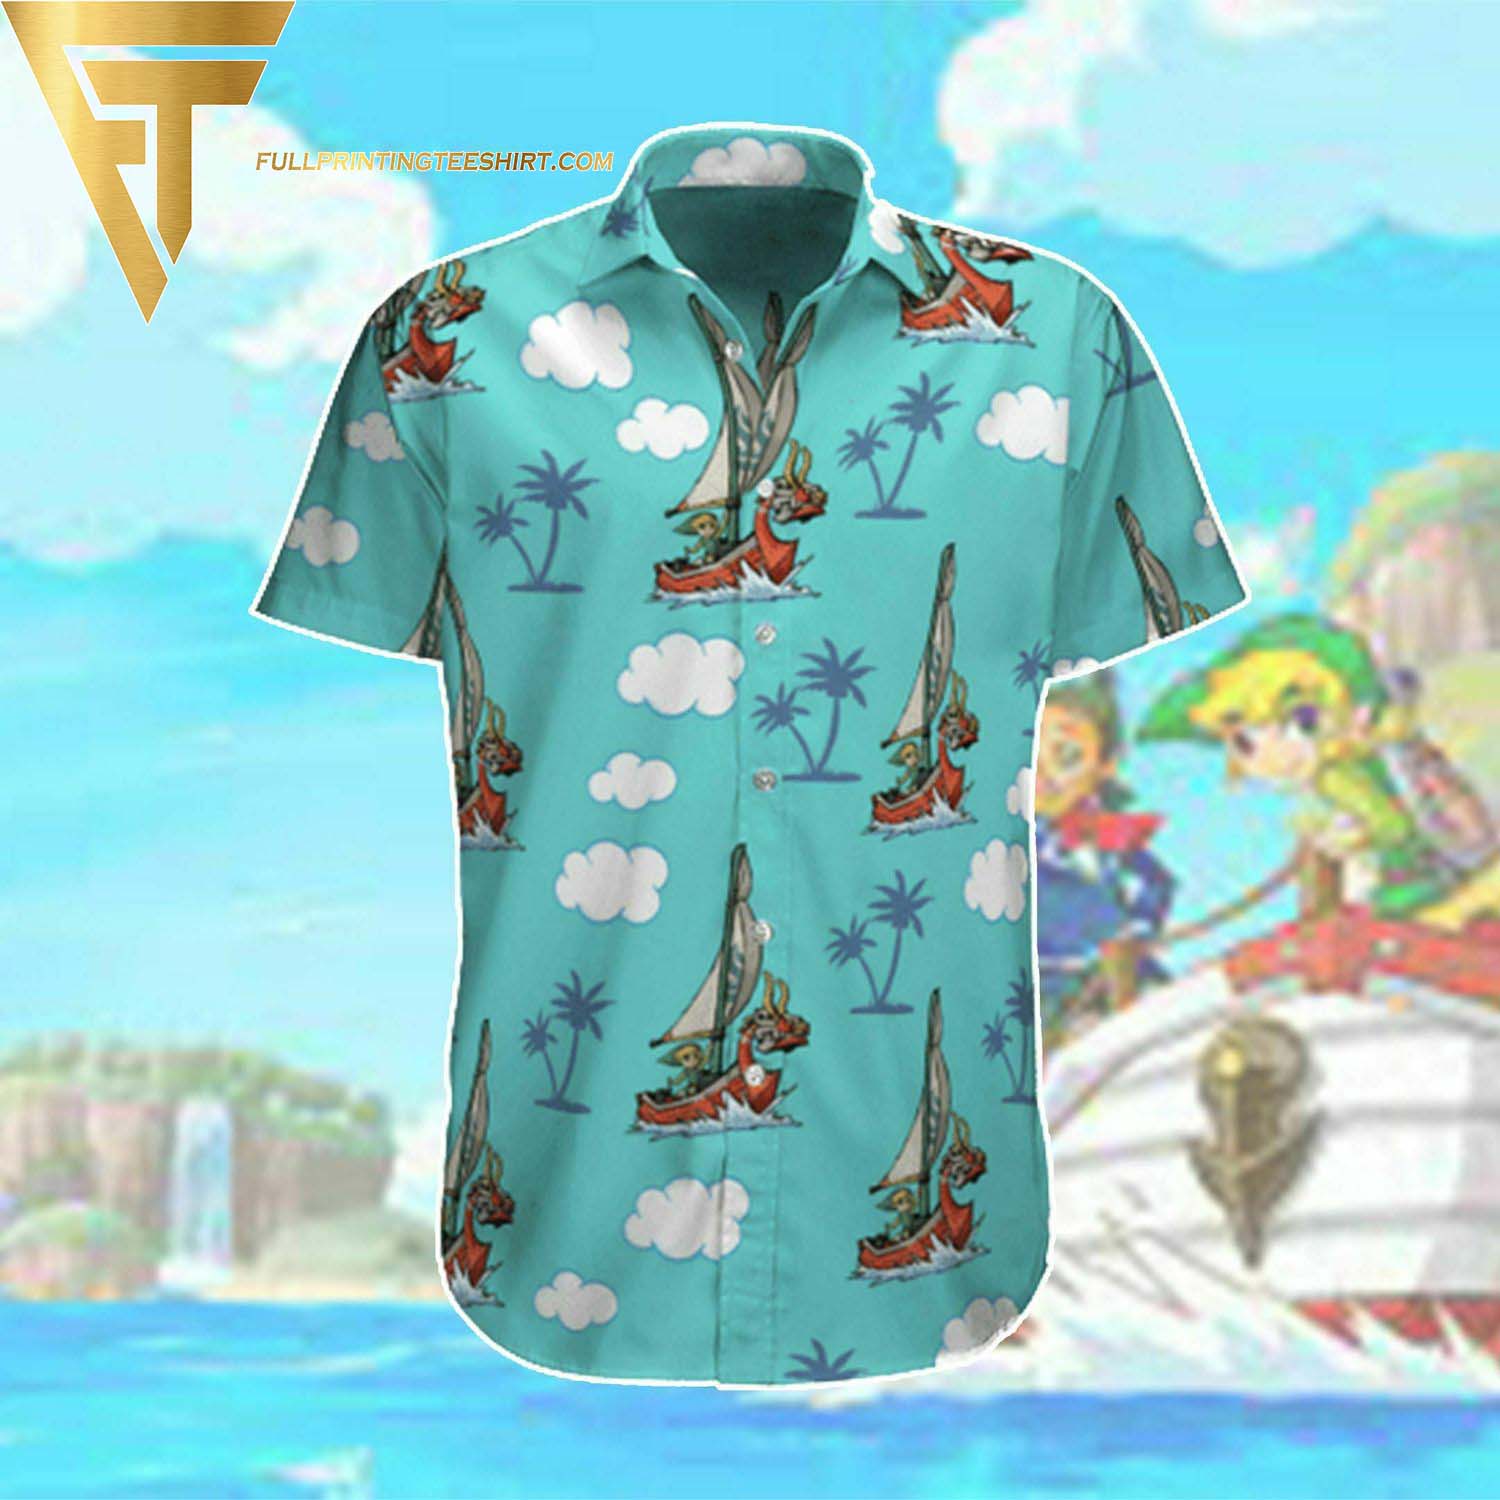 Triforce Threads and Timeless Tales: Unveiling the Zelda Hawaiian Shirt and Unraveling the Legend of Zelda Timeline